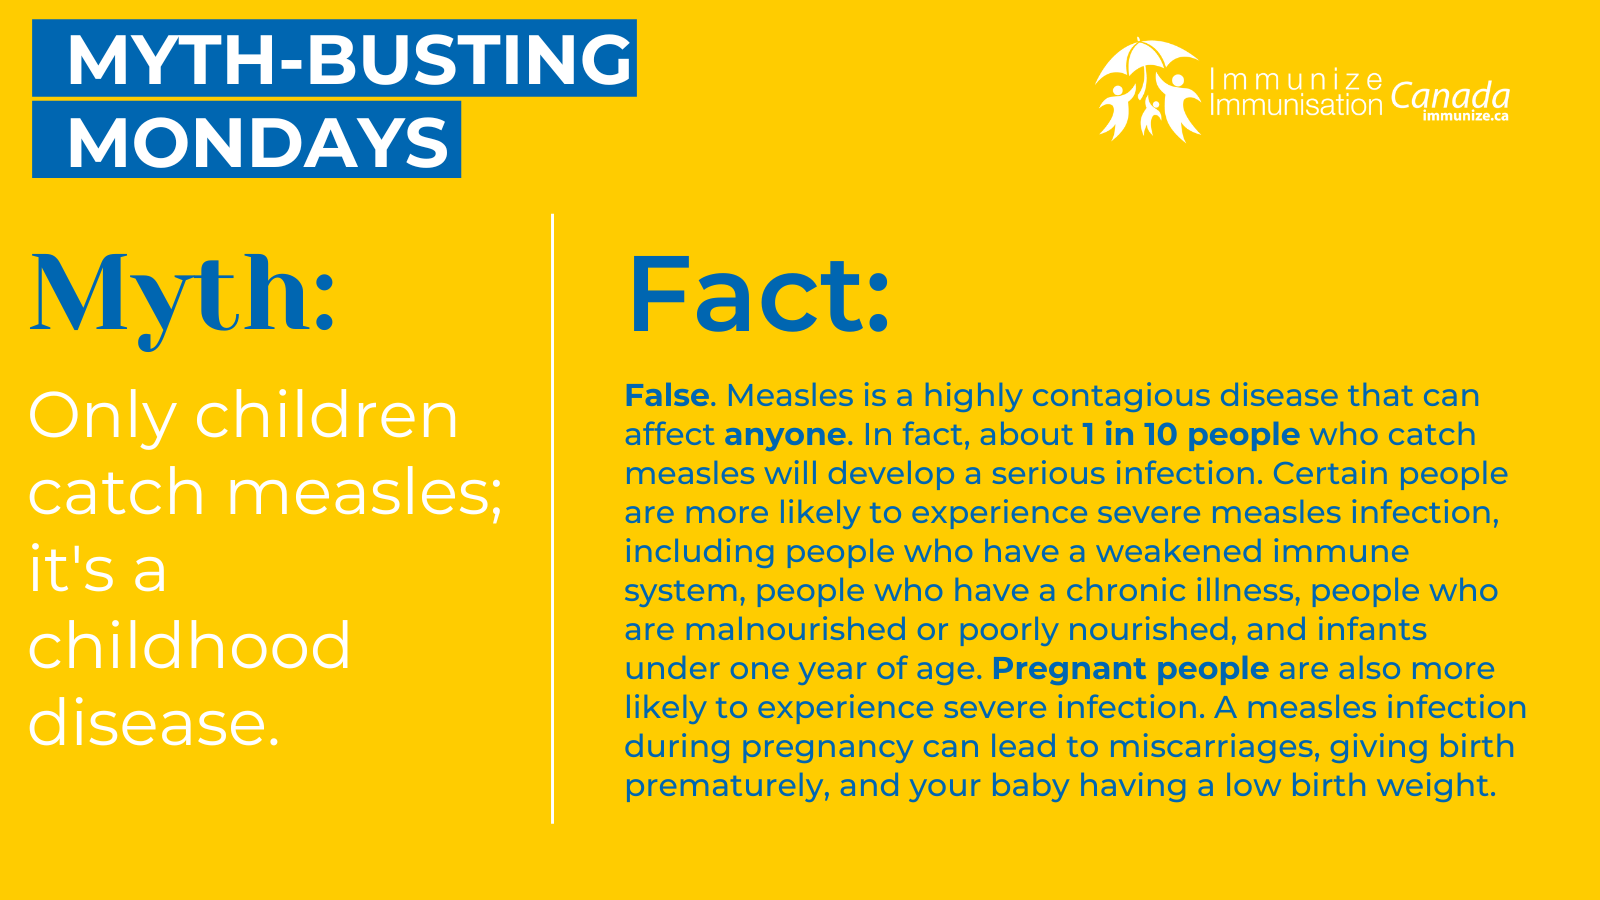 Myth-busting Mondays - measles - image 3 for Twitter